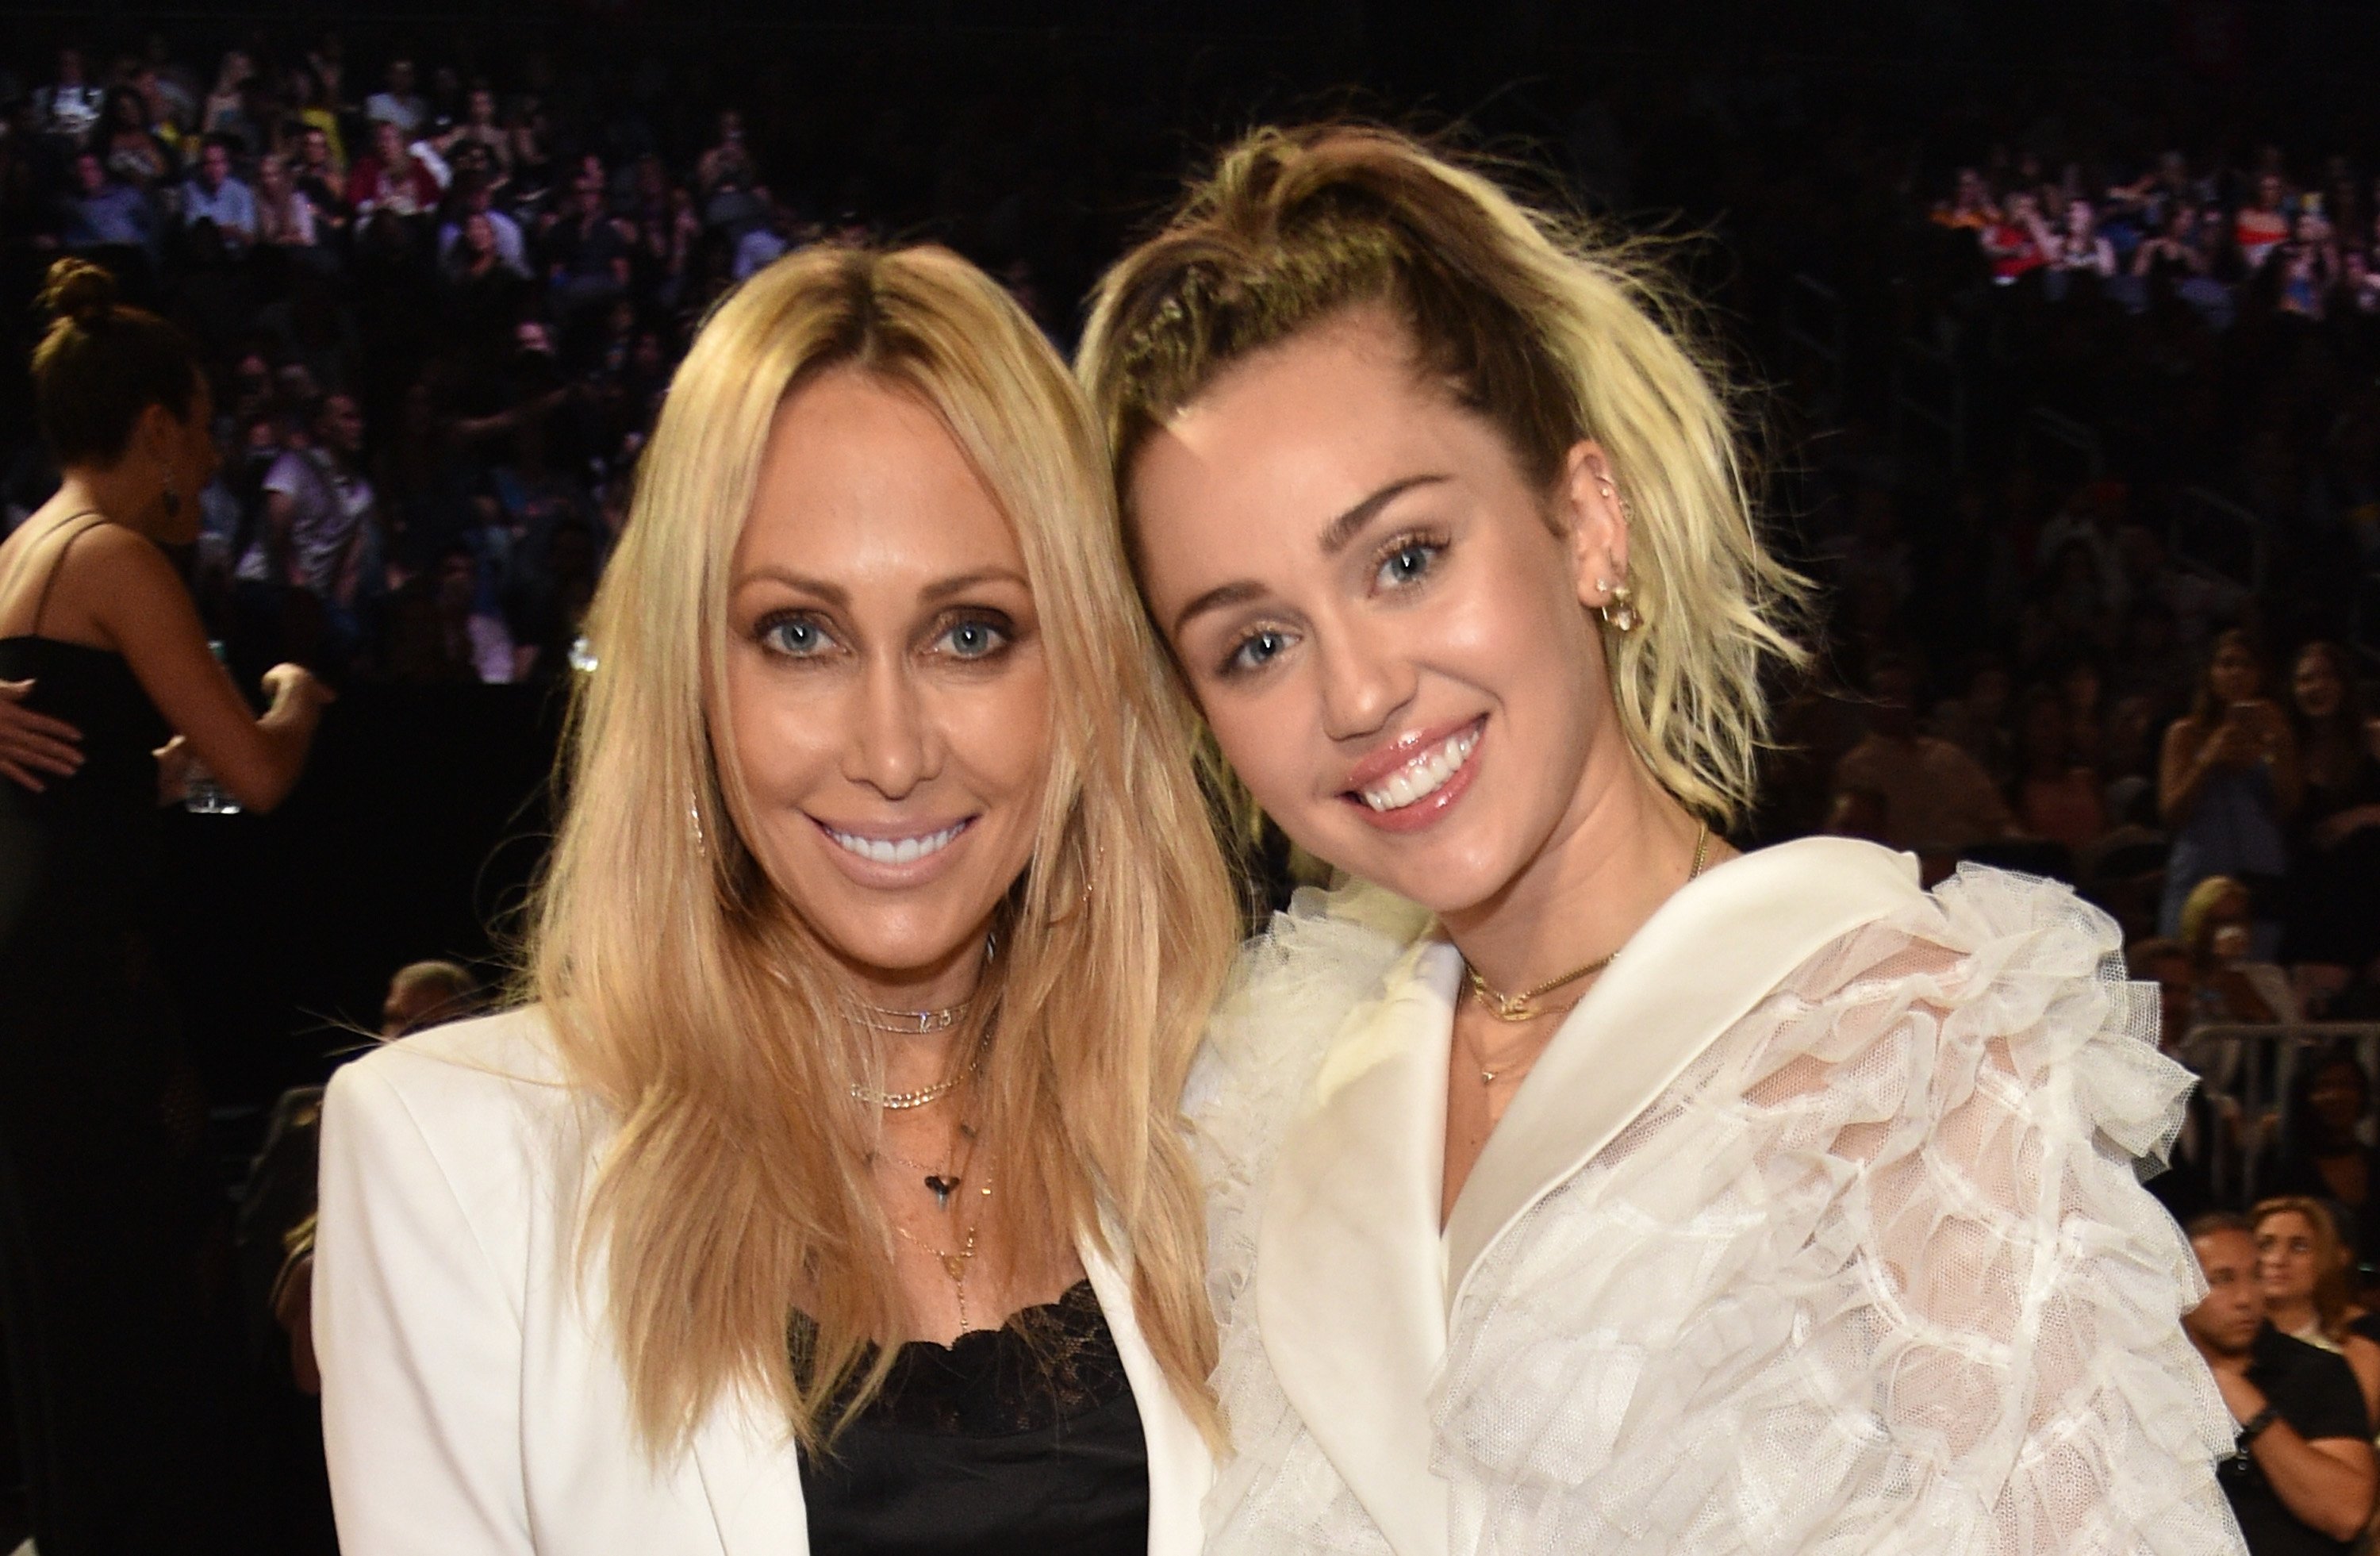 Tish Cyrus (L) and Miley Cyrus attend the 2017 Billboard Music Awards on May 21, 2017